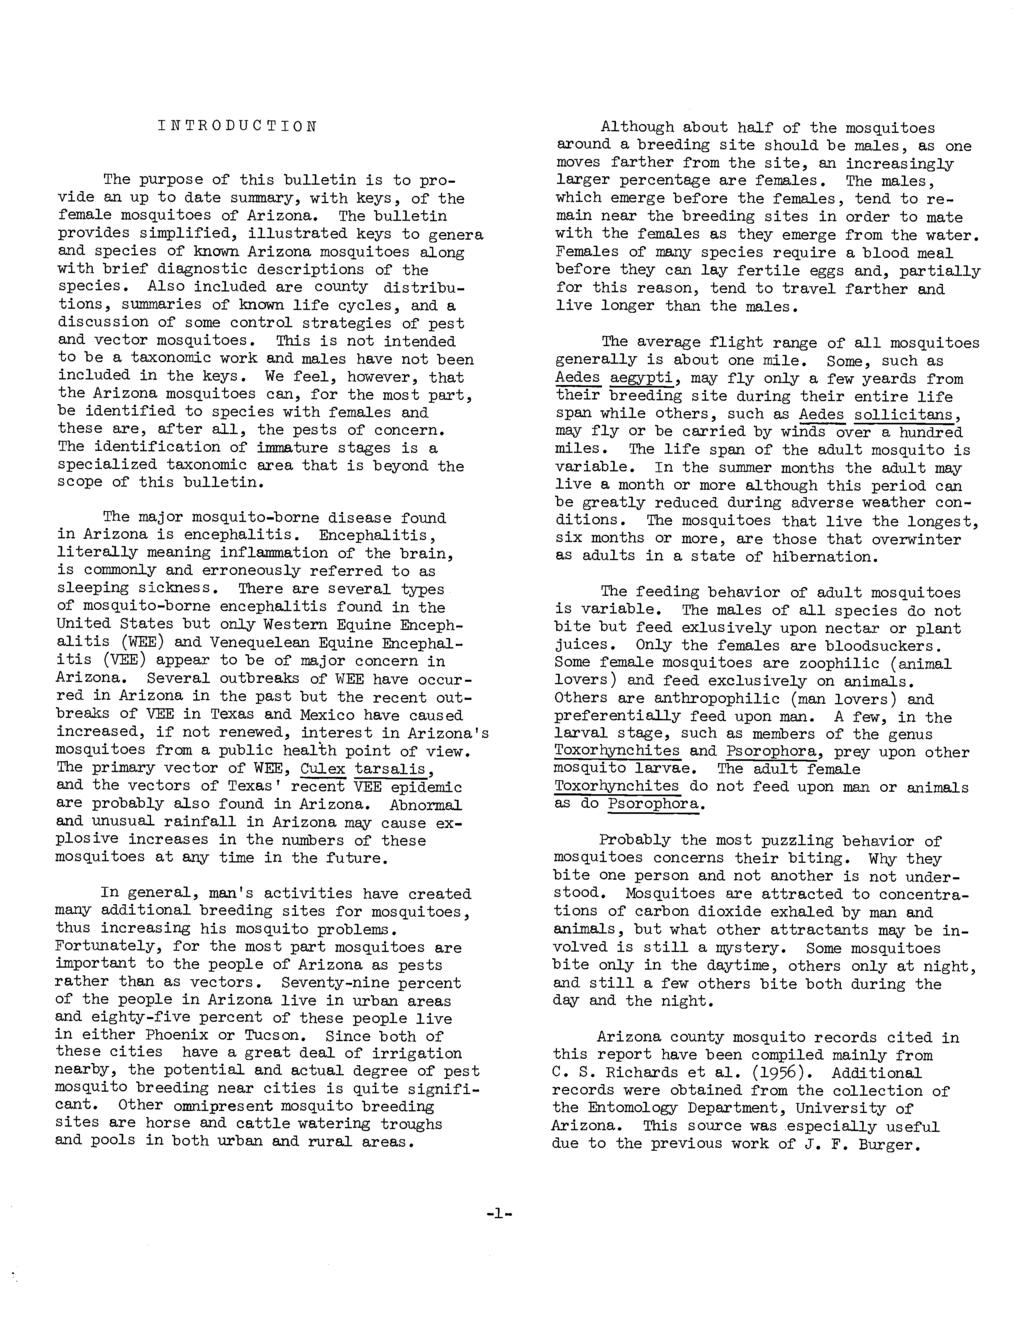 INTRODUCTION The purpose of this bulletin is to provide an up to date summary, with keys, of the female mosquitoes of Arizona.